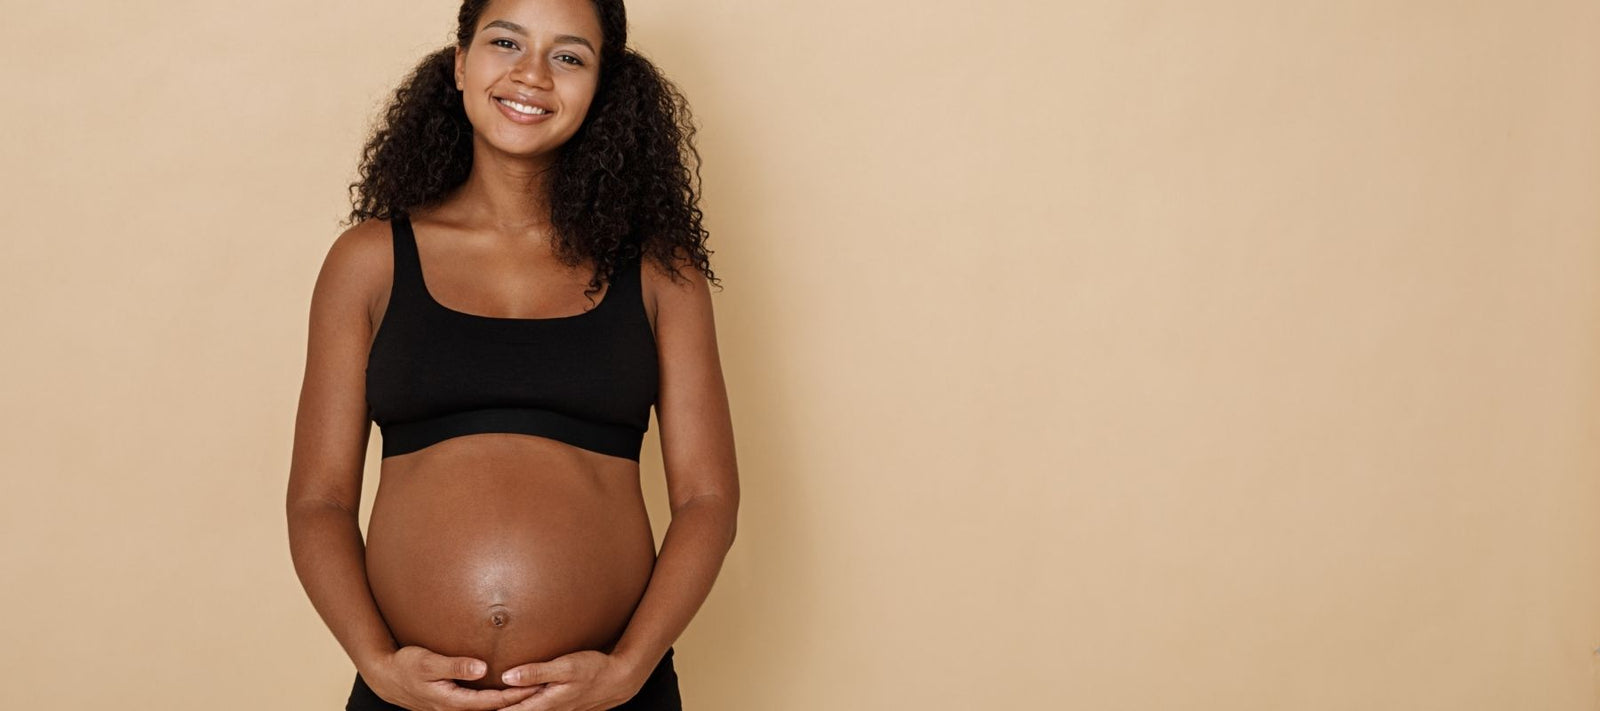 8 Surprising Things That Happen After Labor